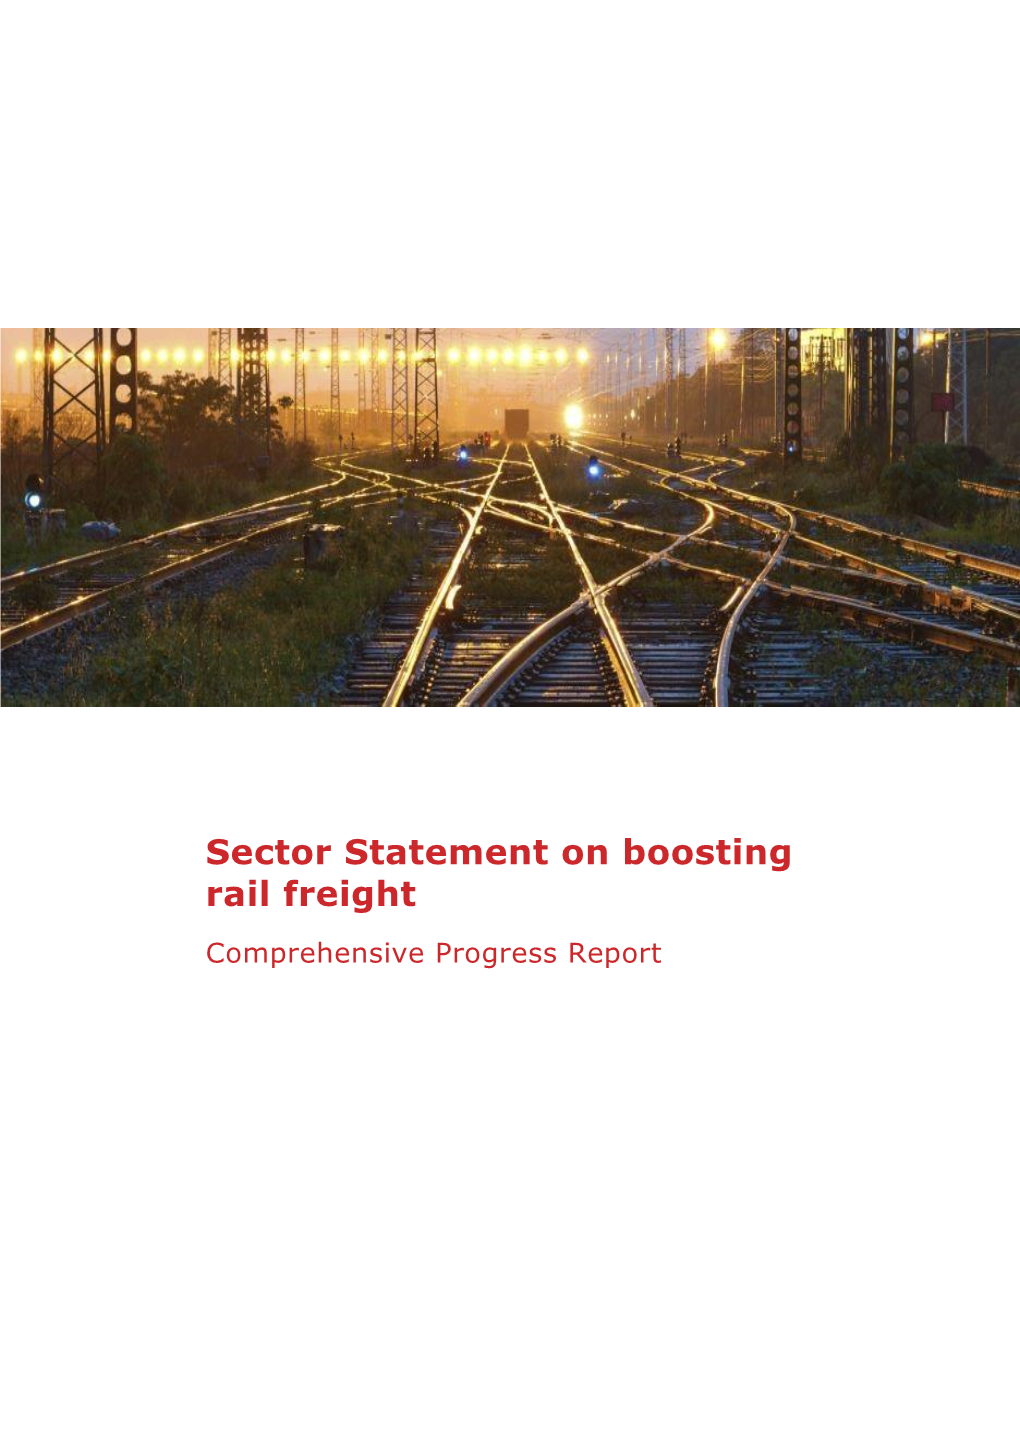 Sector Statement on Boosting Rail Freight